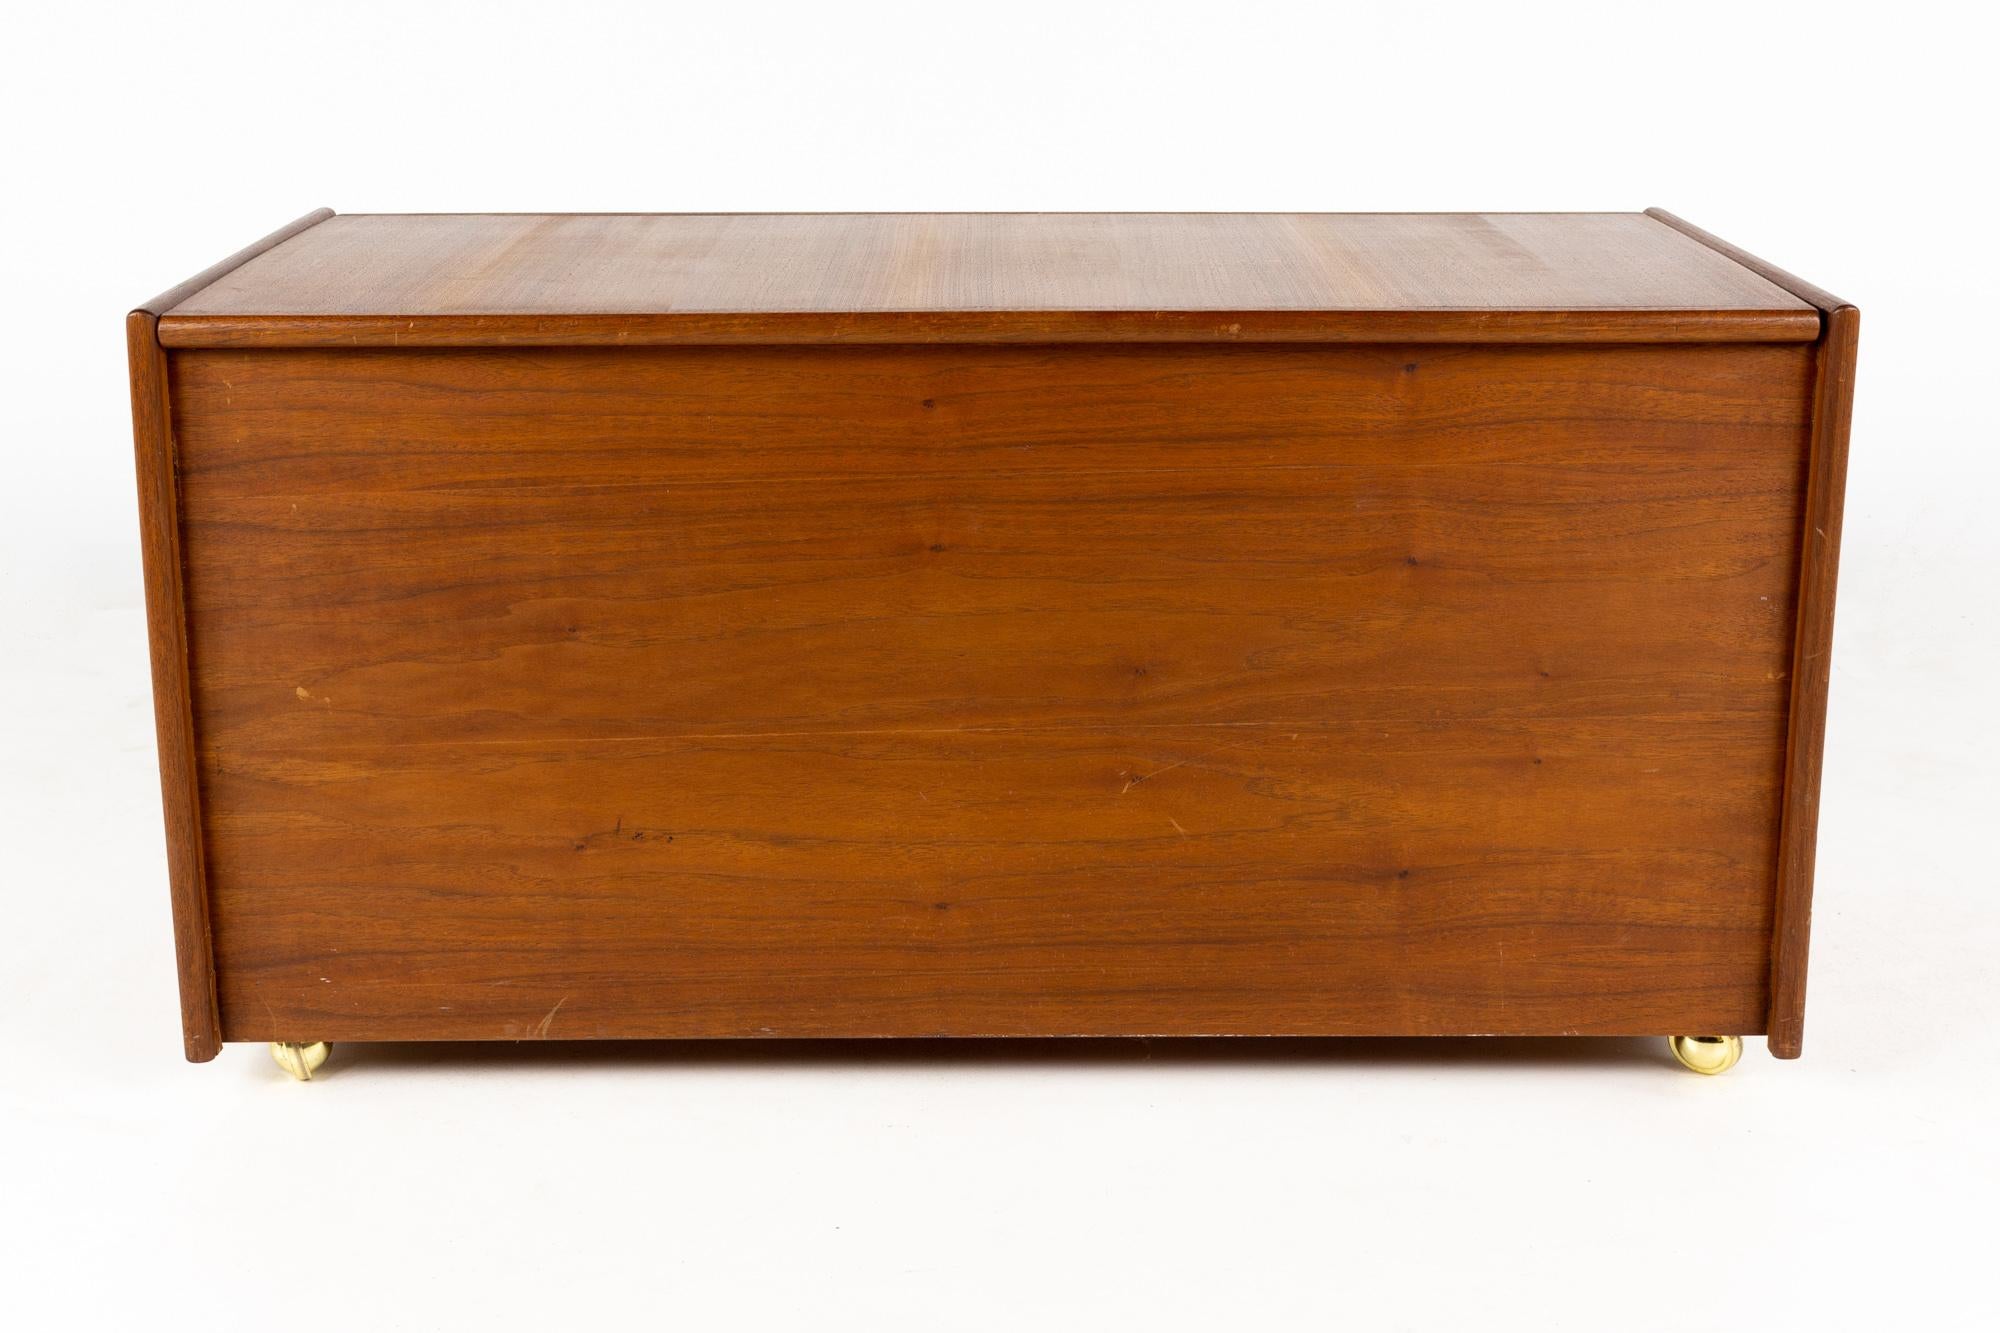 Mid century Danish teak blanket storage chest on wheels.

This chest measures: 41 wide x 19.5 deep x 21 inches high.

All pieces of furniture can be had in what we call restored vintage condition. That means the piece is restored upon purchase